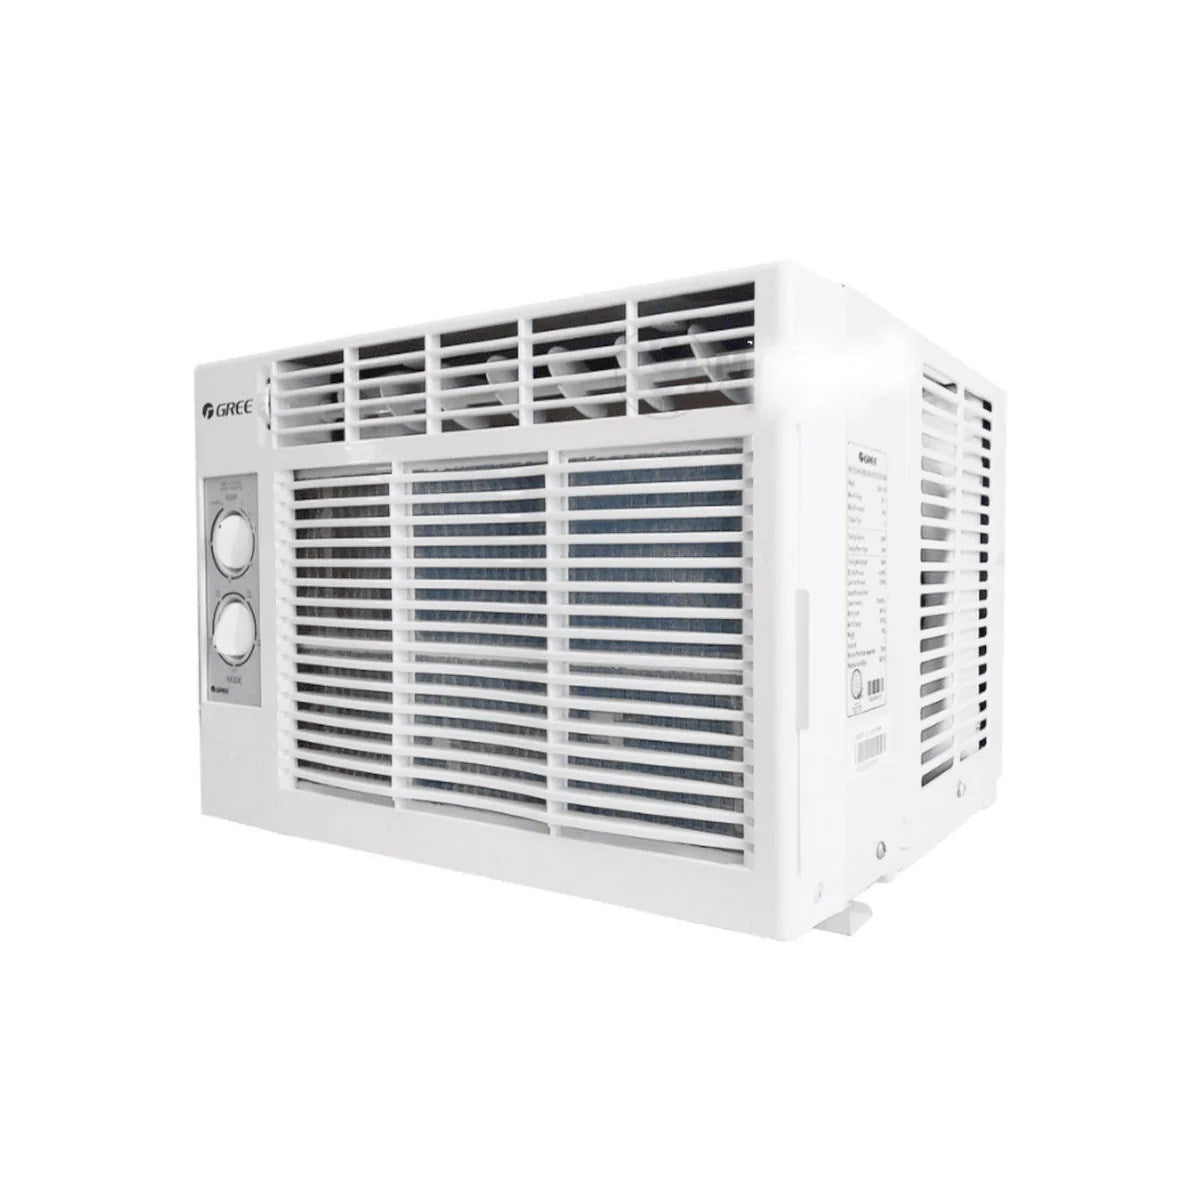 GREE 0.75 HP Window Type Airconditioner / Manual Controlled | JN Ventures